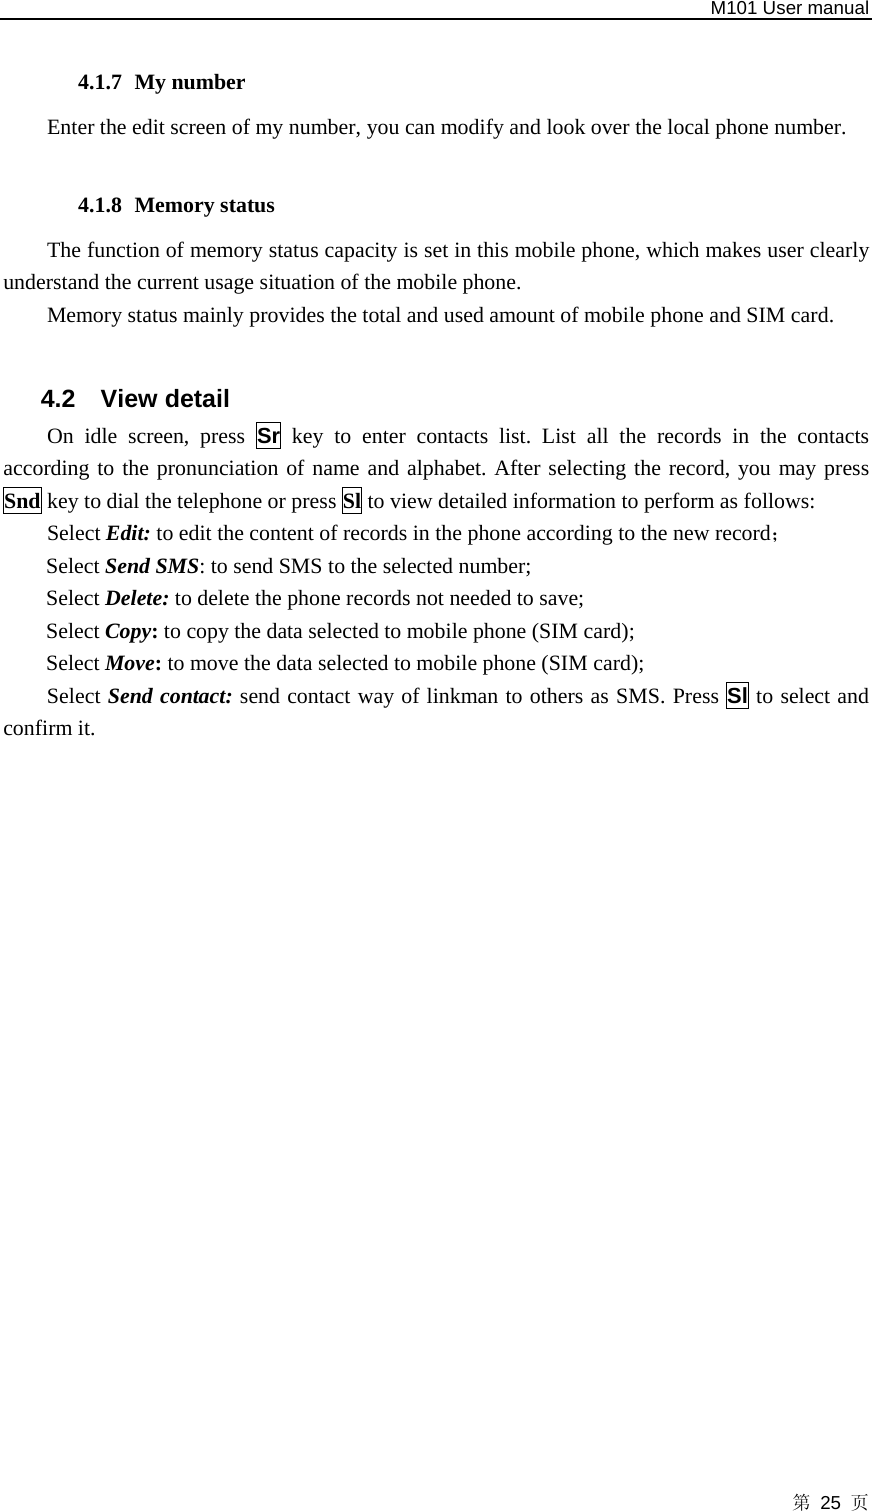   M101 User manual 第 25 页  4.1.7 My number Enter the edit screen of my number, you can modify and look over the local phone number.  4.1.8 Memory status The function of memory status capacity is set in this mobile phone, which makes user clearly understand the current usage situation of the mobile phone.   Memory status mainly provides the total and used amount of mobile phone and SIM card.  4.2 View detail On idle screen, press Sr key to enter contacts list. List all the records in the contacts according to the pronunciation of name and alphabet. After selecting the record, you may press Snd key to dial the telephone or press Sl to view detailed information to perform as follows: Select Edit: to edit the content of records in the phone according to the new record； Select Send SMS: to send SMS to the selected number;   Select Delete: to delete the phone records not needed to save; Select Copy: to copy the data selected to mobile phone (SIM card); Select Move: to move the data selected to mobile phone (SIM card); Select Send contact: send contact way of linkman to others as SMS. Press Sl to select and confirm it.  